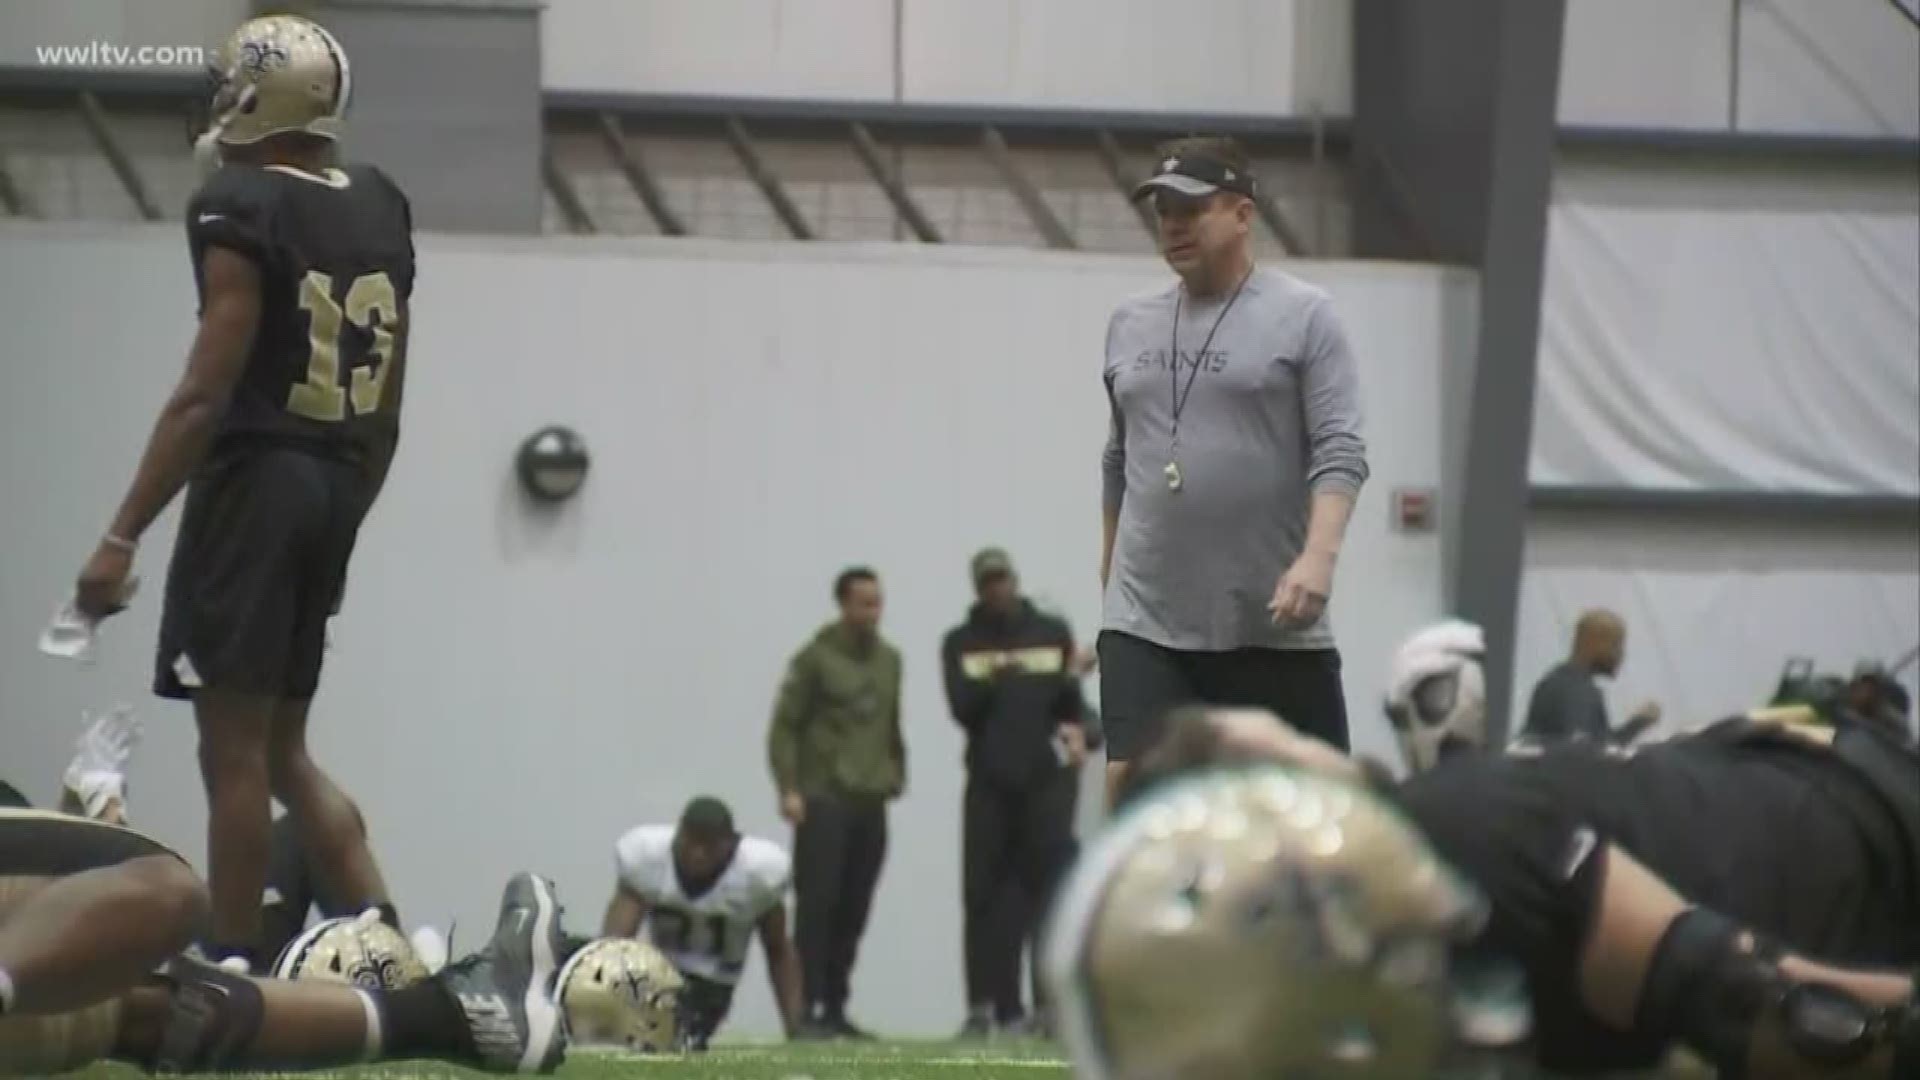 At Saints practice Wednesday, Coach Sean Payton drove onto the field in a cart filled with $225,000 in $1 bills and the Lombardi Superbowl trophy.